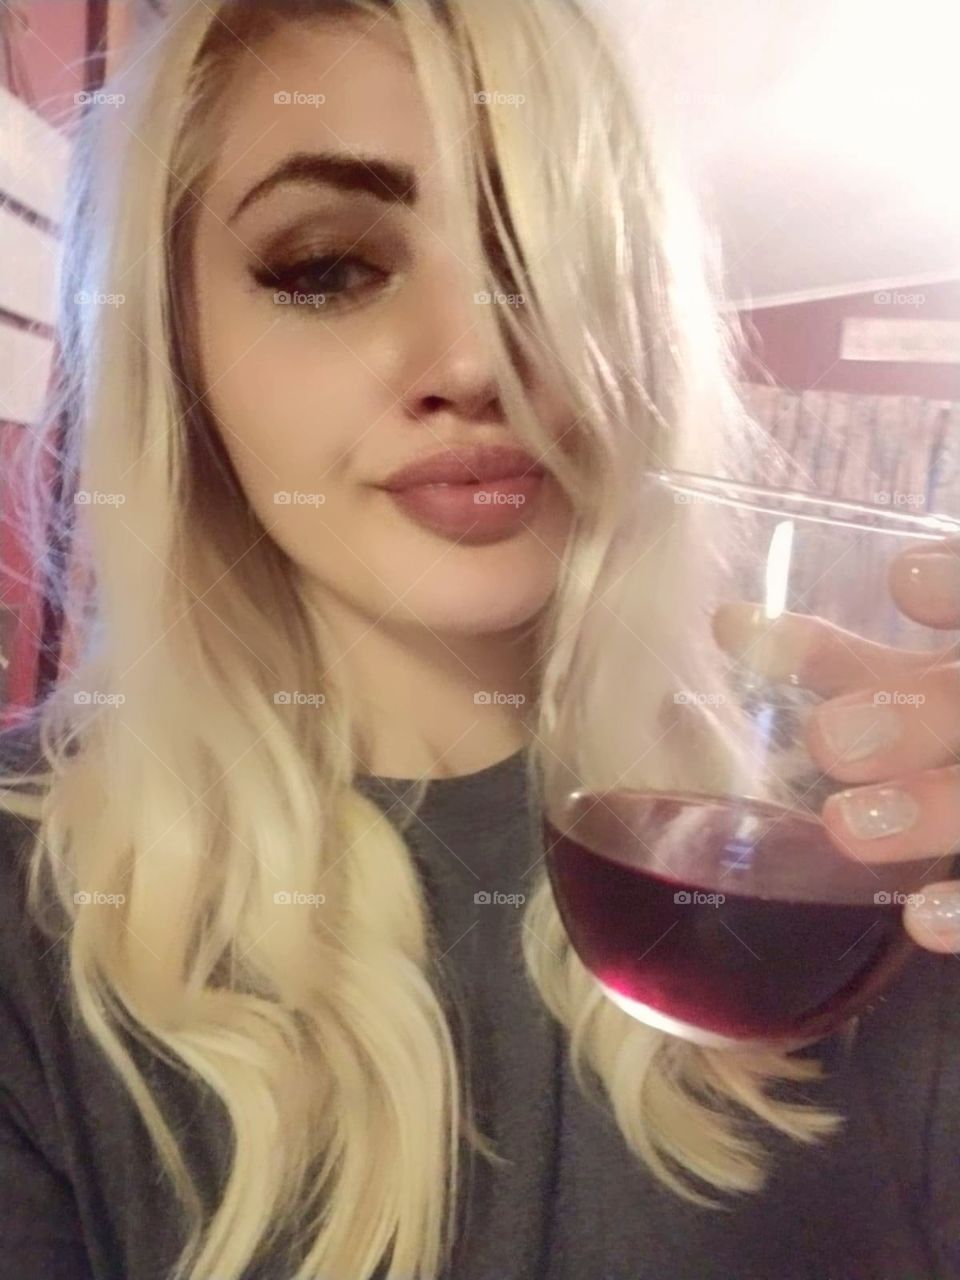 Wine after a long day!!